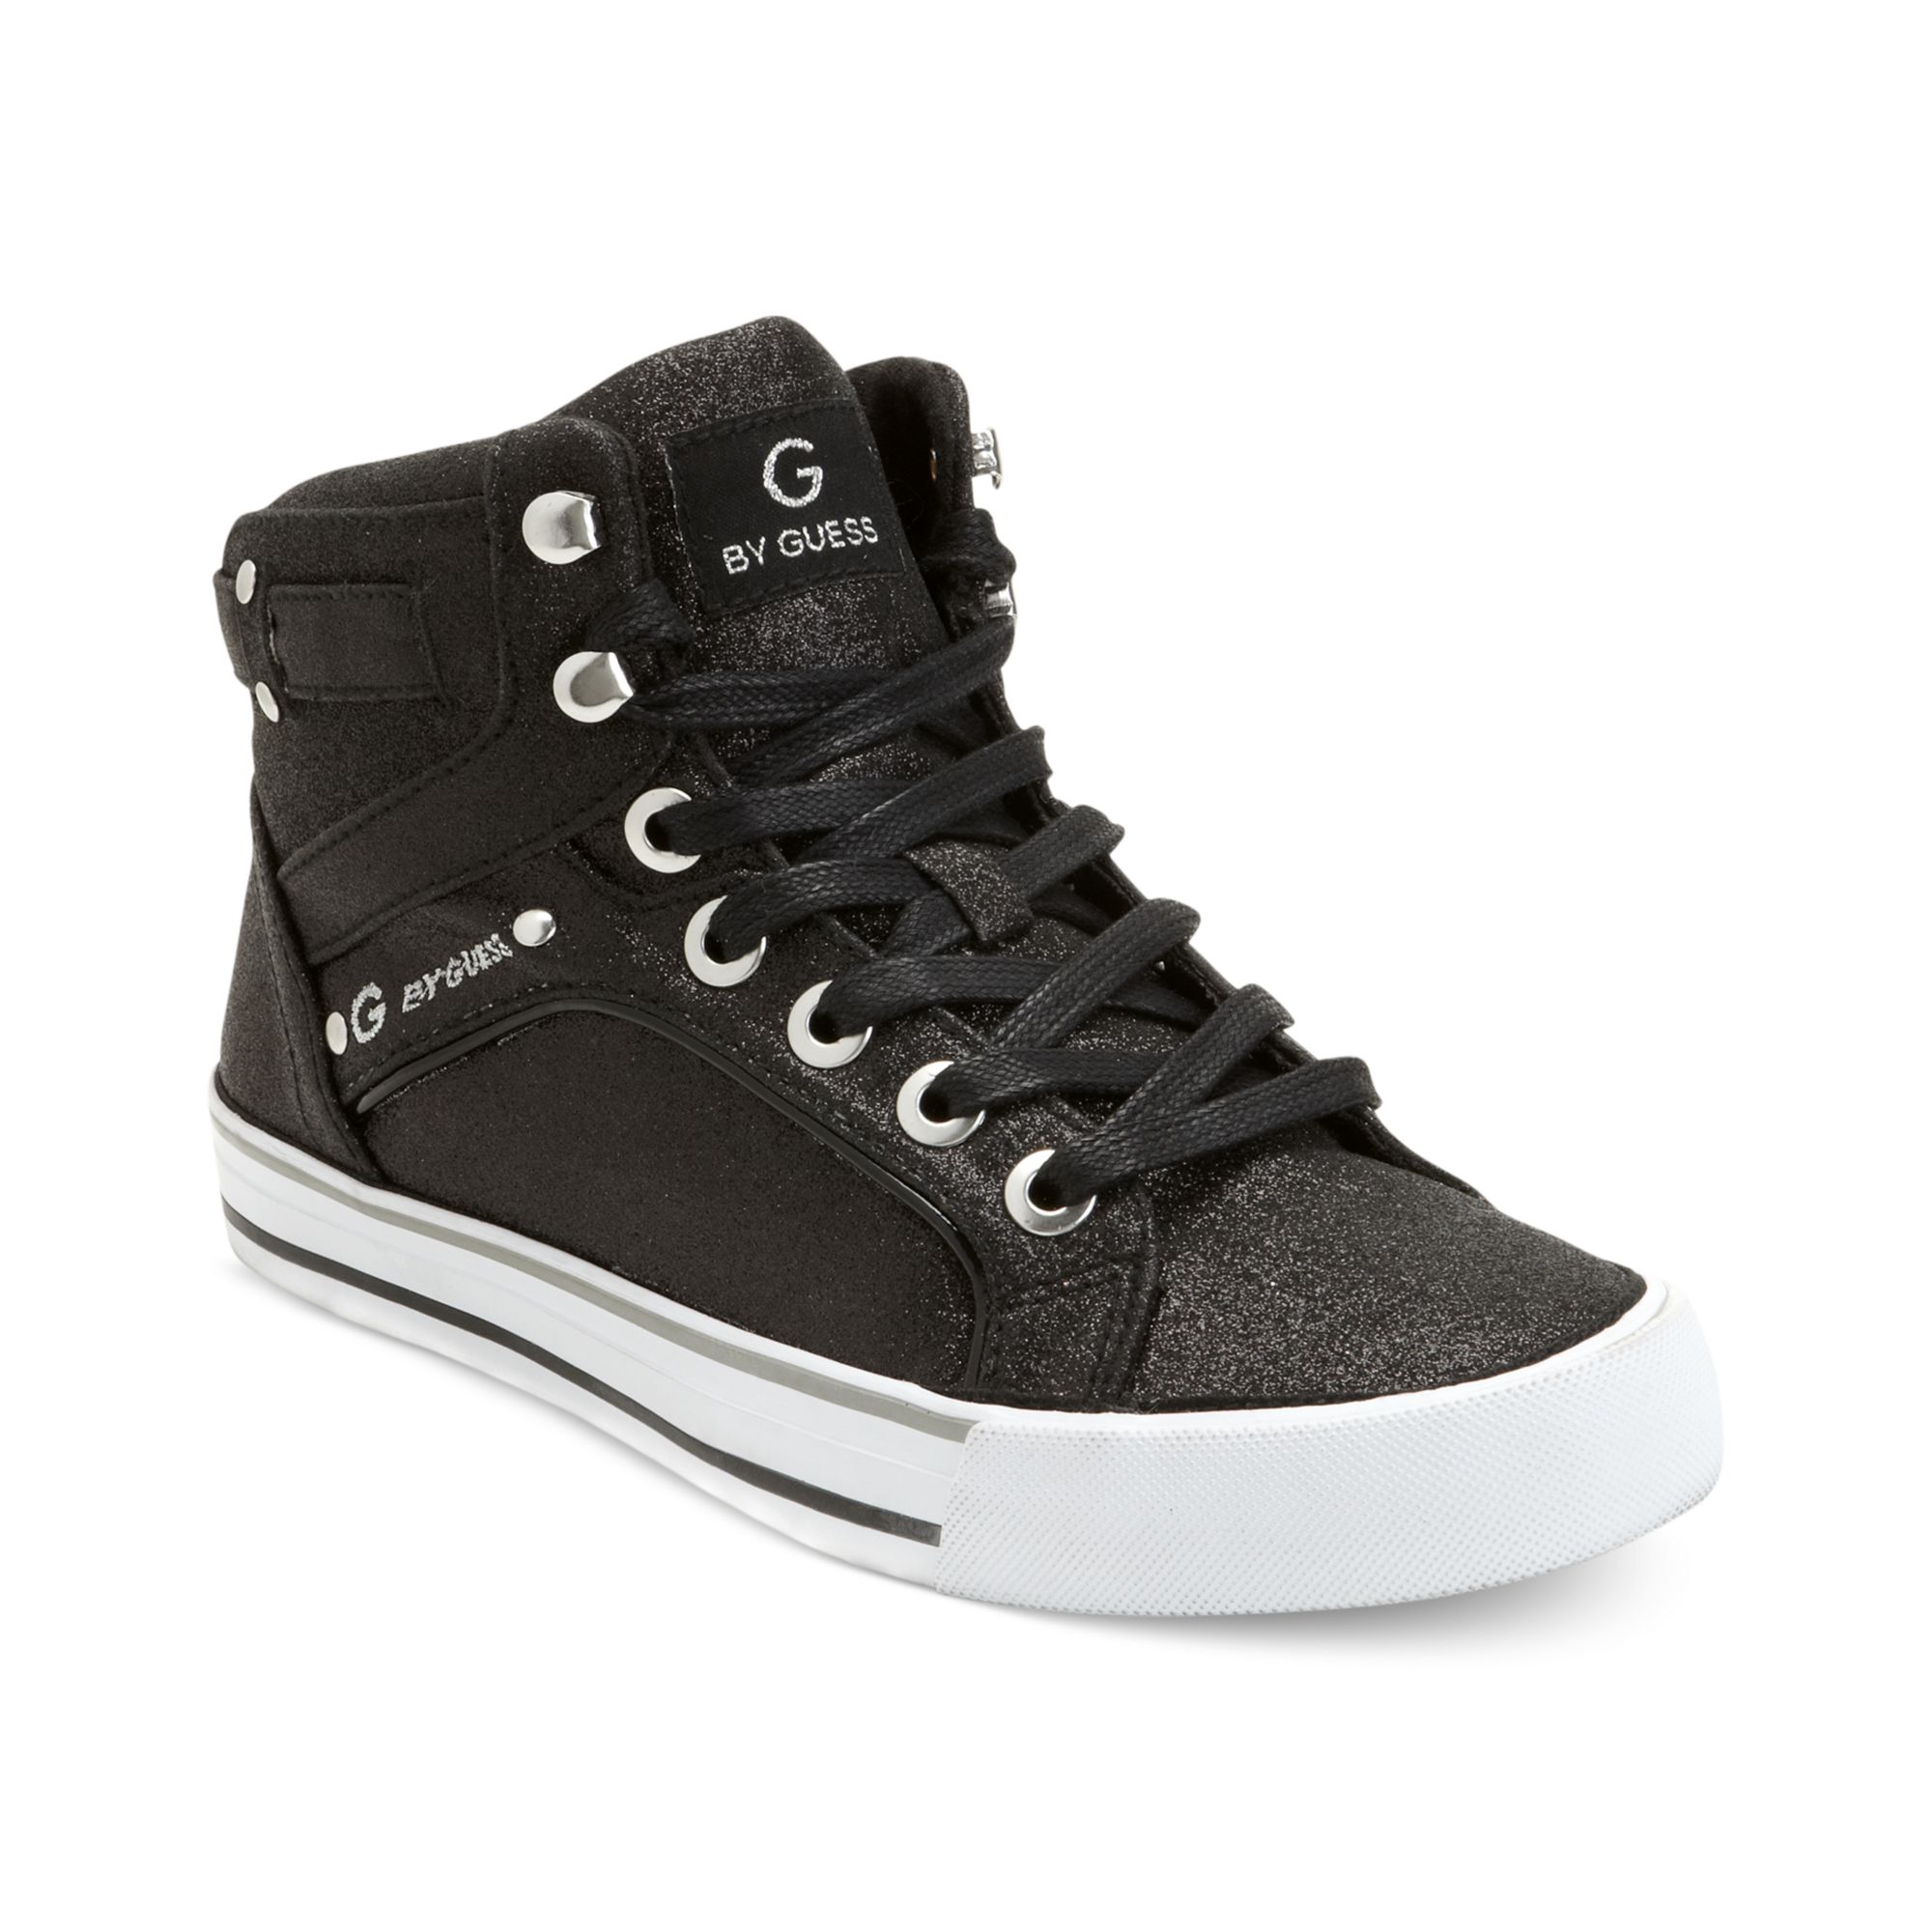 G by guess G By Guess Womens Shoes Opall2 Hi Top Sneakers ...